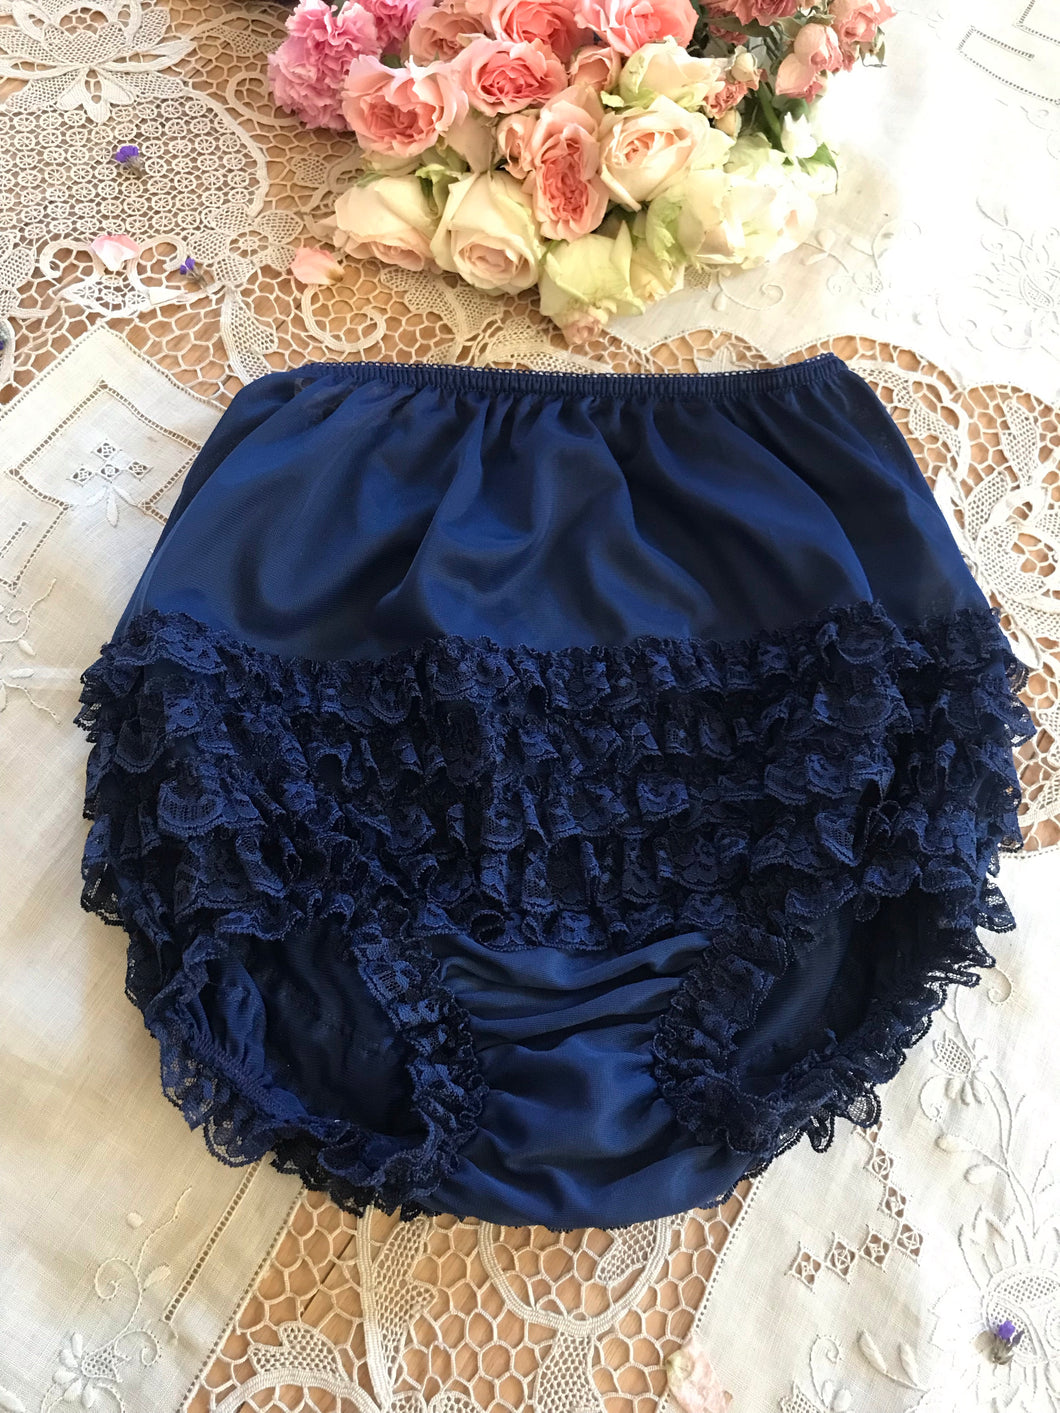 Authentic 1970’s vintage navy ruffle panties by Fantasia